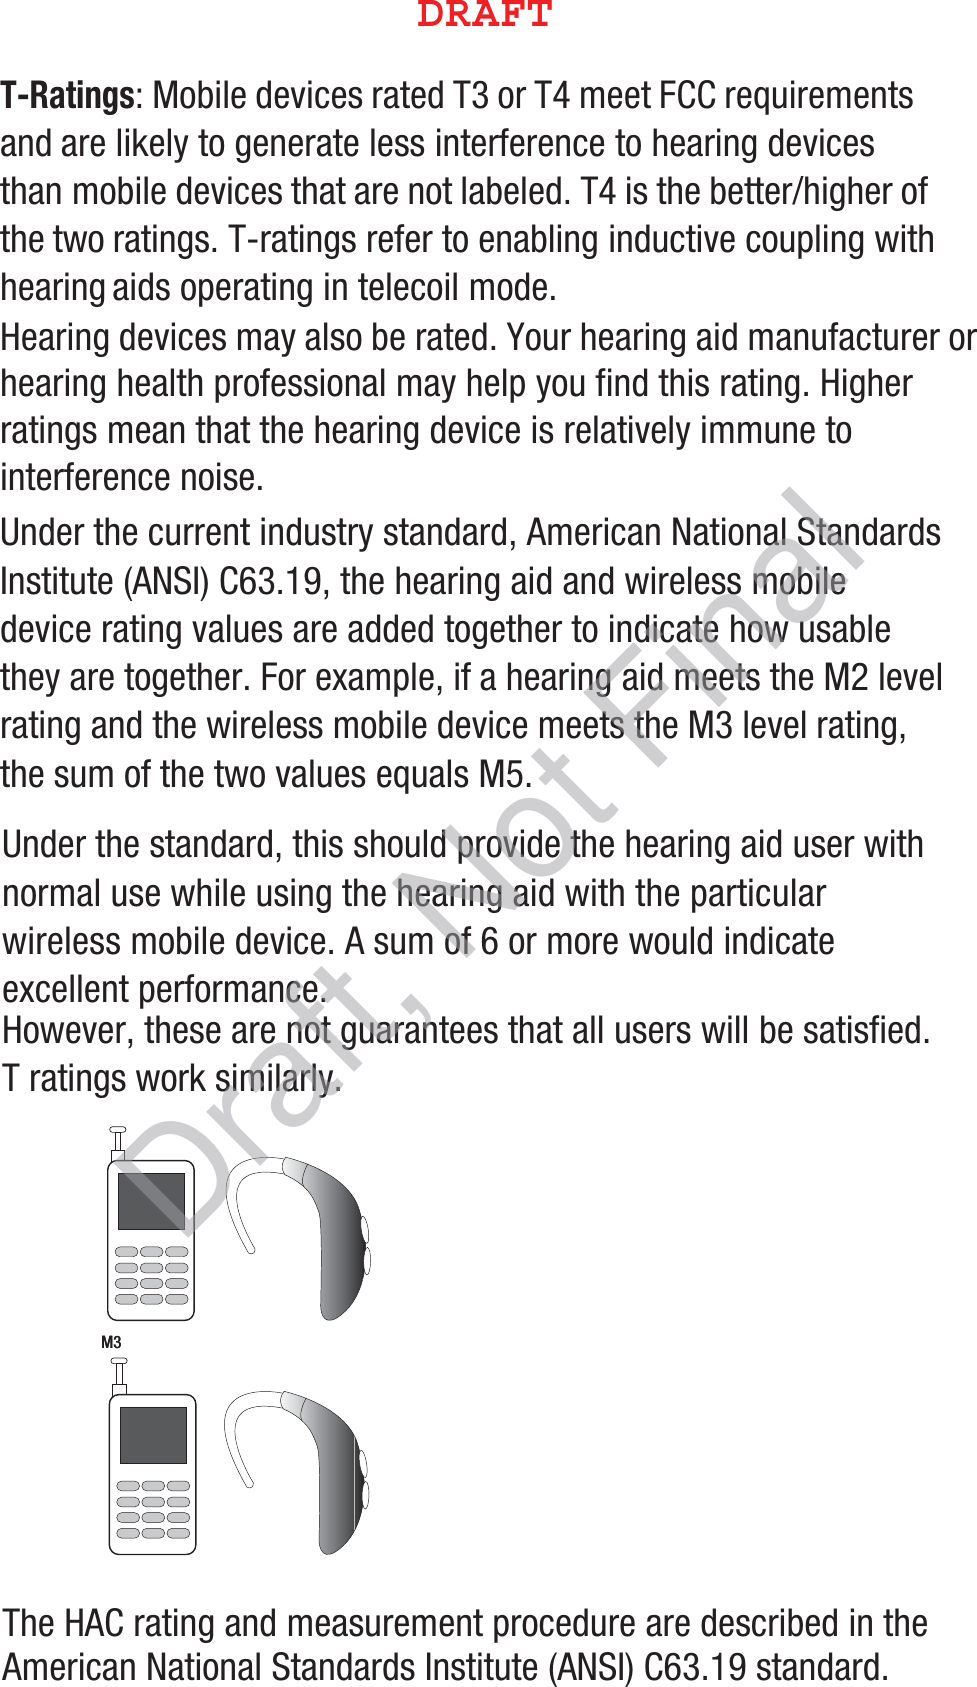 T-Ratings: Mobile devices rated T3 or T4 meet FCC requirements and are likely to generate less interference to hearing devices than mobile devices that are not labeled. T4 is the better/higher of the two ratings. T-ratings refer to enabling inductive coupling with hearing aids operating in telecoil mode.Hearing devices may also be rated. Your hearing aid manufacturer or hearing health professional may help you find this rating. Higher ratings mean that the hearing device is relatively immune to interference noise. Under the current industry standard, American National Standards Institute (ANSI) C63.19, the hearing aid and wireless mobile device rating values are added together to indicate how usable they are together. For example, if a hearing aid meets the M2 level rating and the wireless mobile device meets the M3 level rating, the sum of the two values equals M5. Under the standard, this should provide the hearing aid user with normal use while using the hearing aid with the particular wireless mobile device. A sum of 6 or more would indicate excellent performance.  However, these are not guarantees that all users will be satisfied. T ratings work similarly.The HAC rating and measurement procedure are described in the American National Standards Institute (ANSI) C63.19 standard.   M3       M3        %3&quot;&apos;5Draft, Not Final